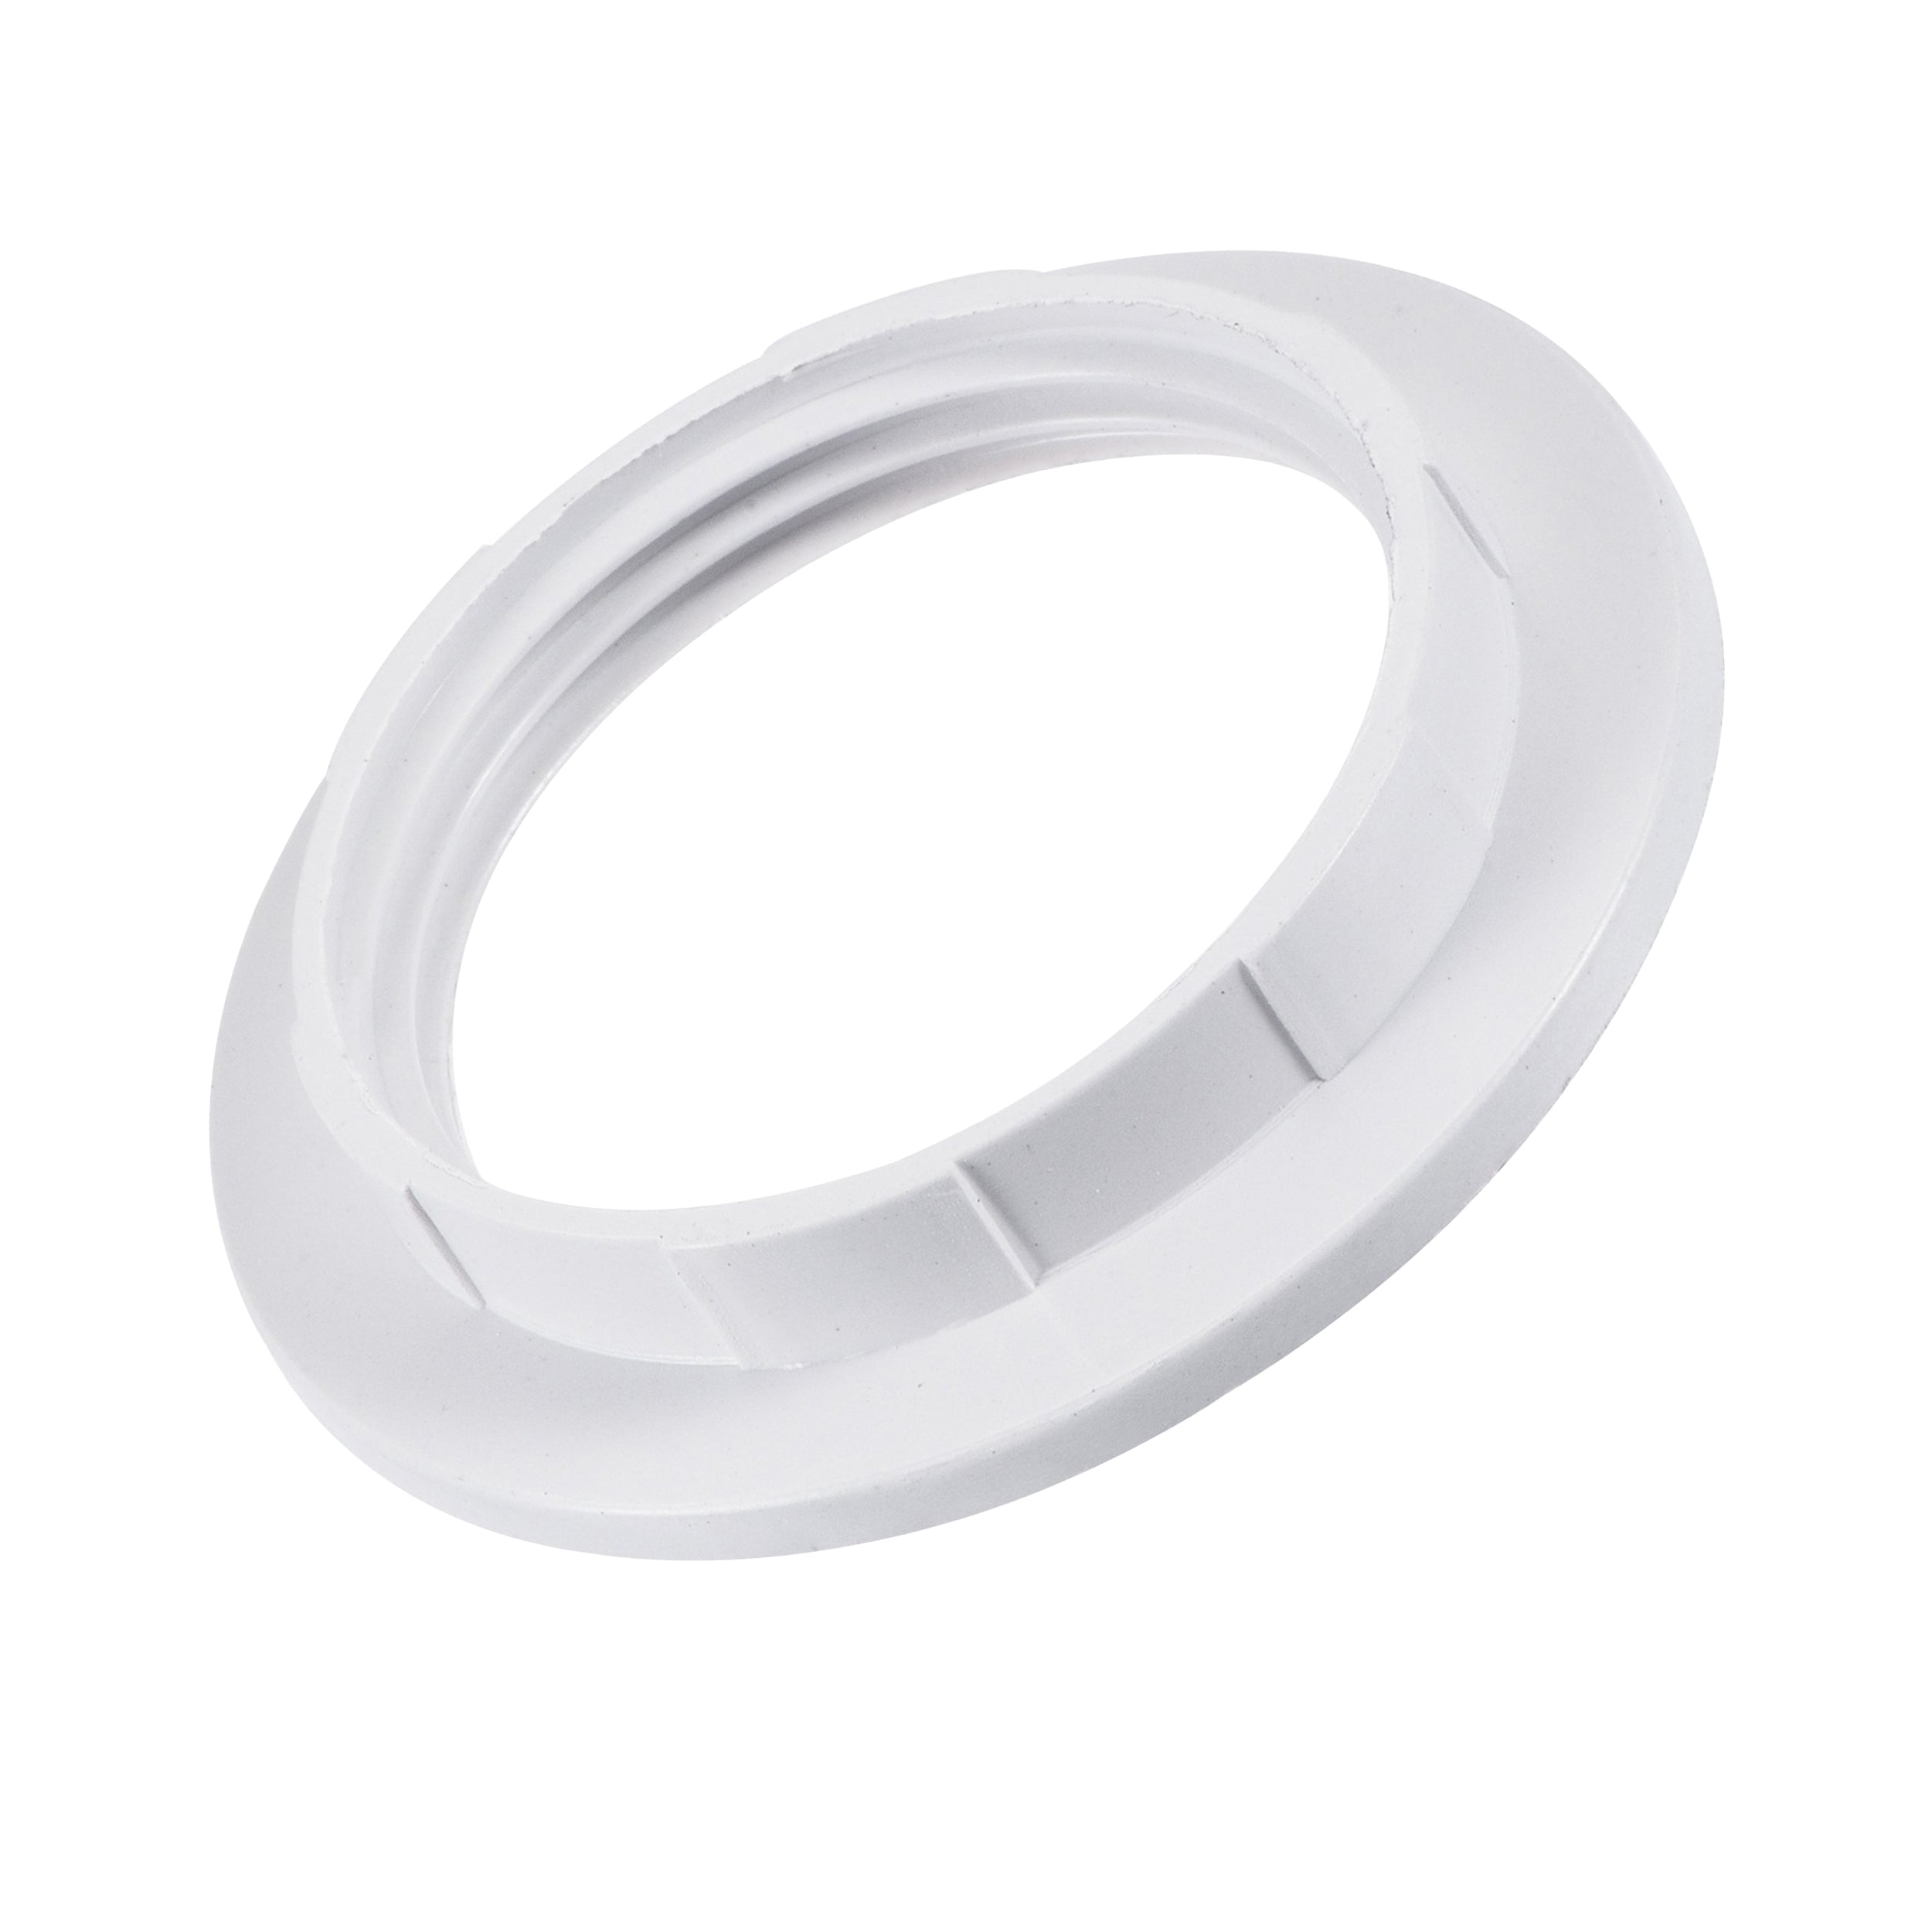 White Light Shade Collar Ring Adaptor E27 Lamp Bulb Holder Screw connected and Made of Plastic.